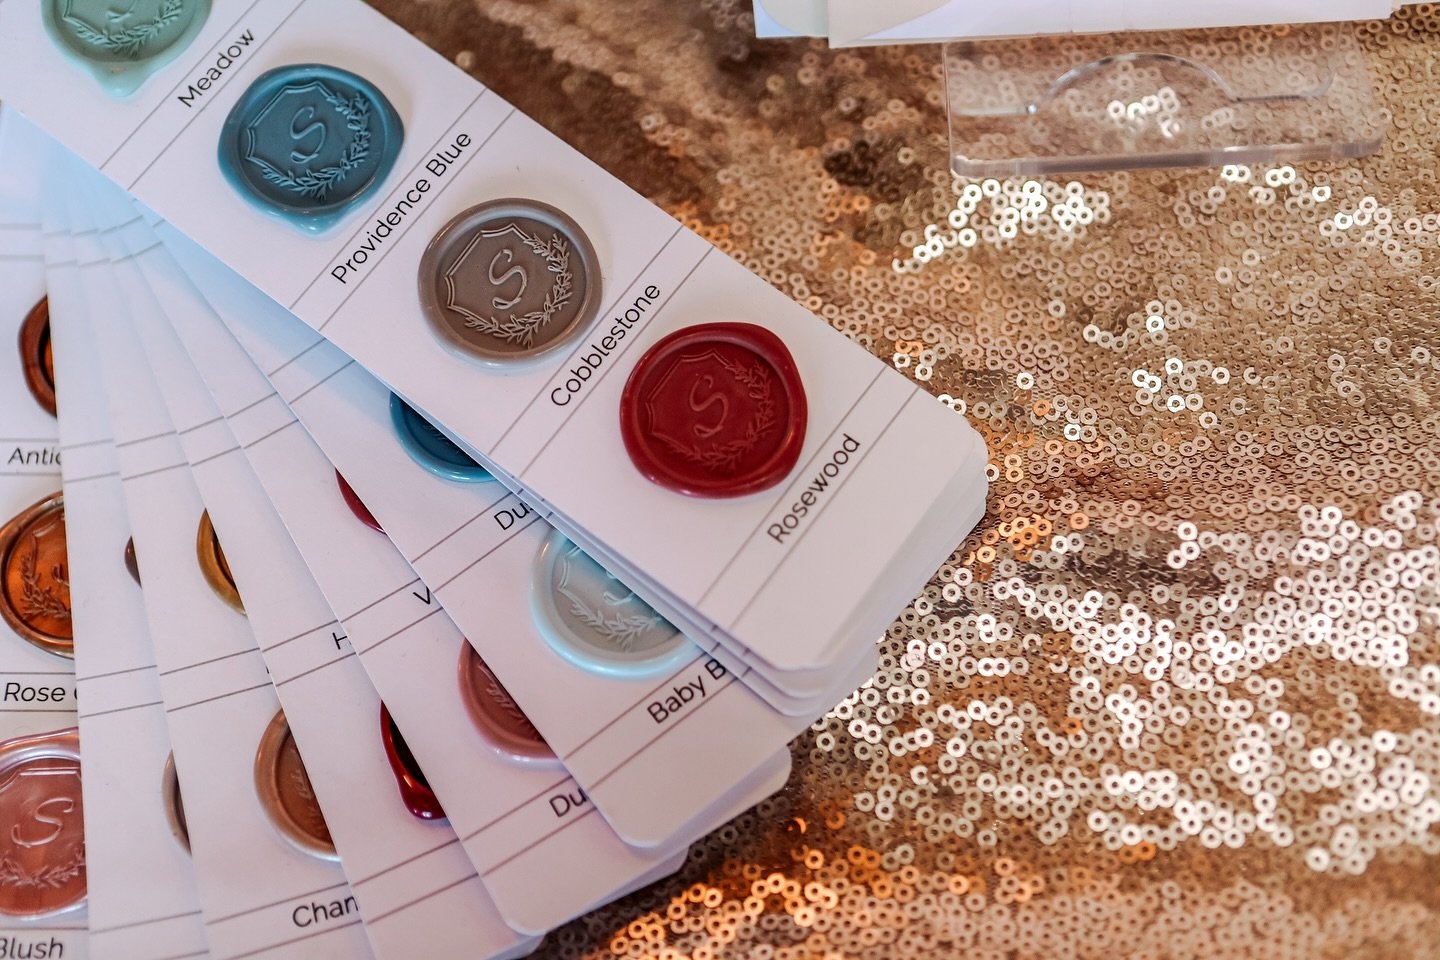 Wax seals are the perfect way to dress up your wedding invitations, programs, menus, place cards, and more! Plus, look at all the color choices 😍
.
.
#graphicpoetry #waxsealstamp #waxseals #waxsealing #weddinginvitations #weddingstationery #artisair